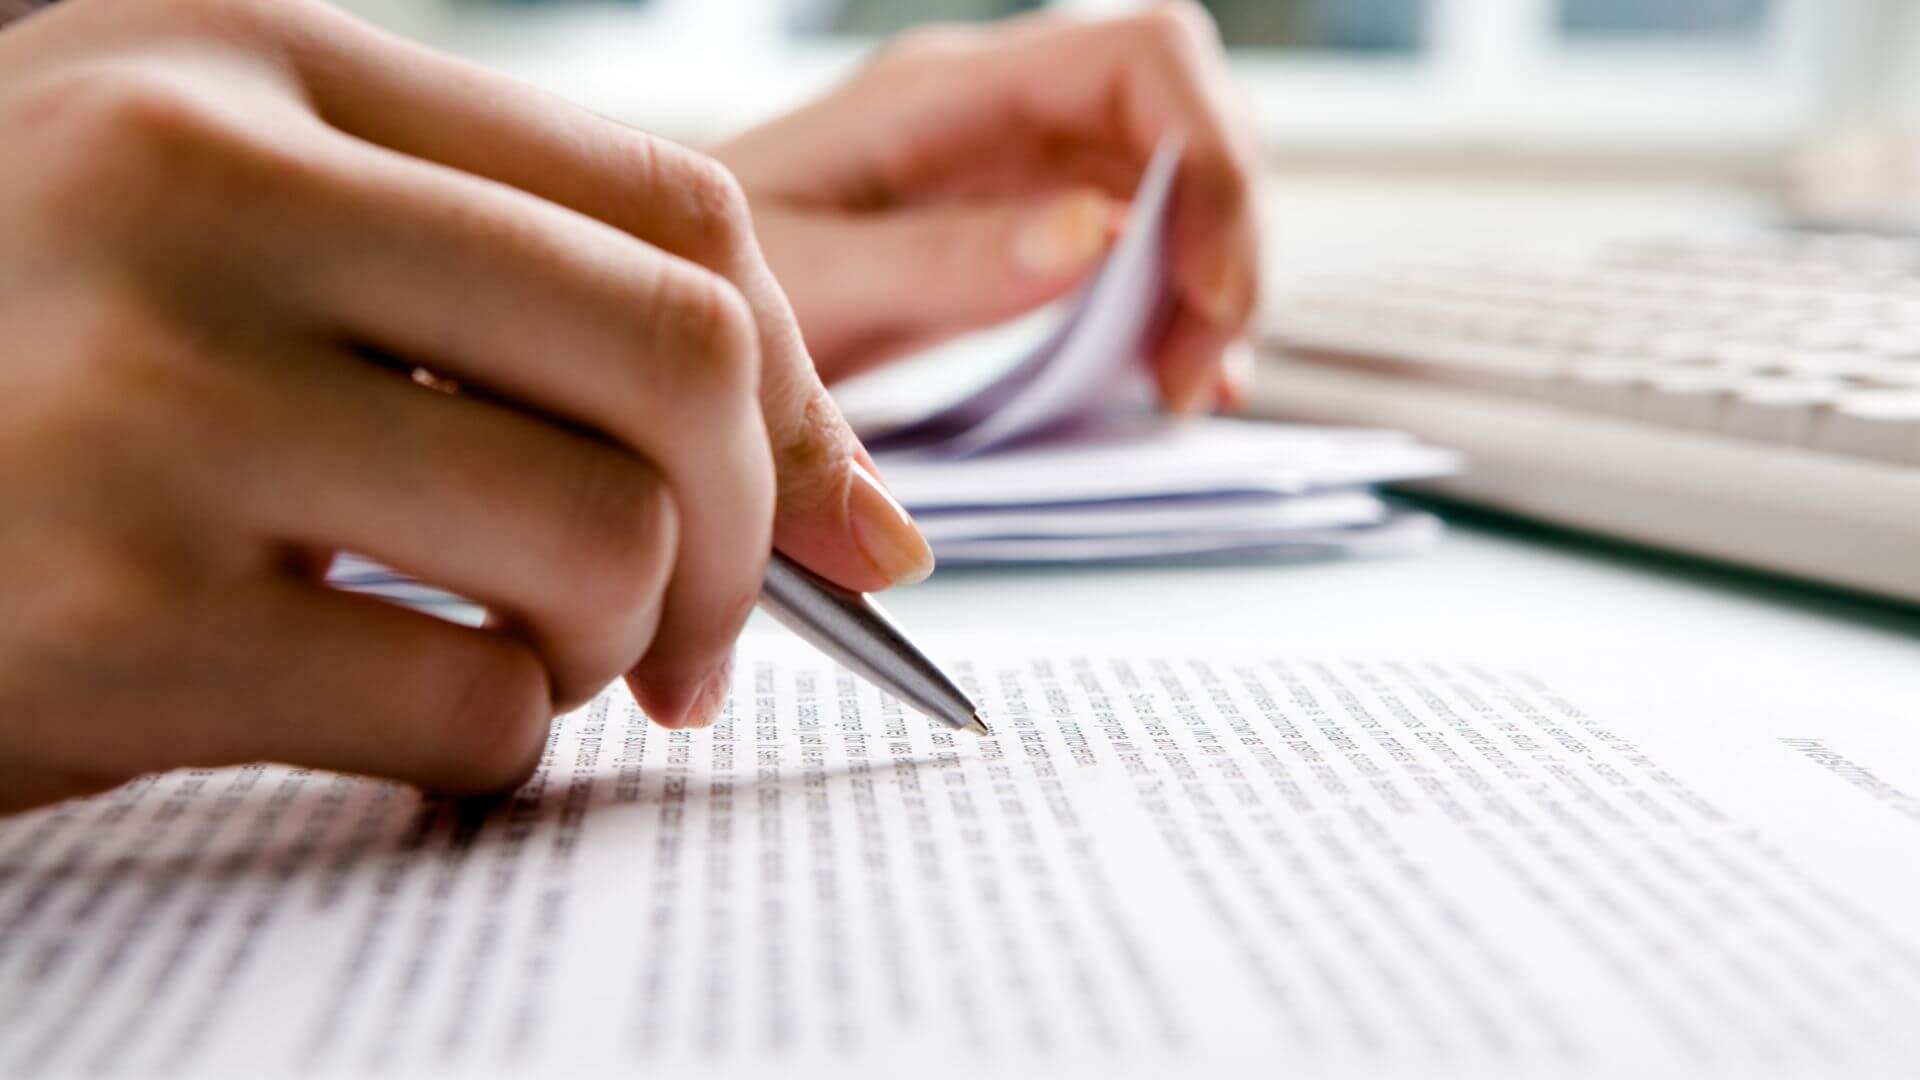 Close-up of a landlord’s manicured hands holding a pen while going through paperwork at a desk.